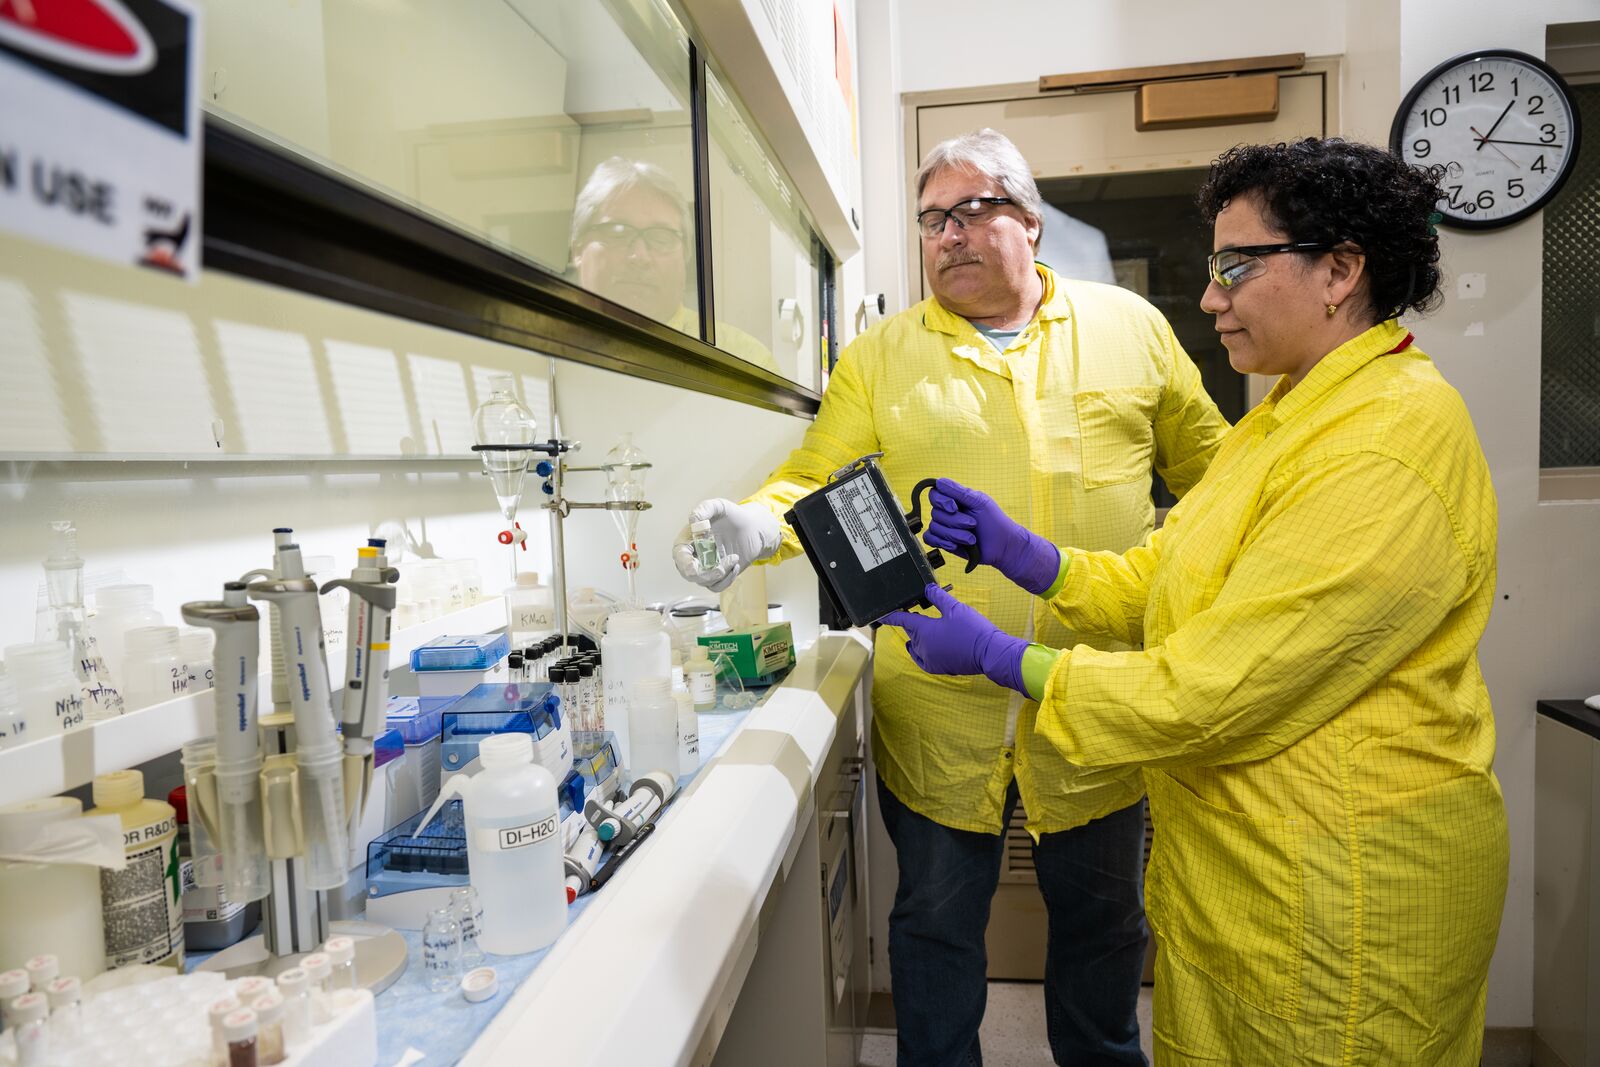 Photo of intern (right) in lab safety gear working with a mentor (left) from the PNNL Radiological Protection Team.